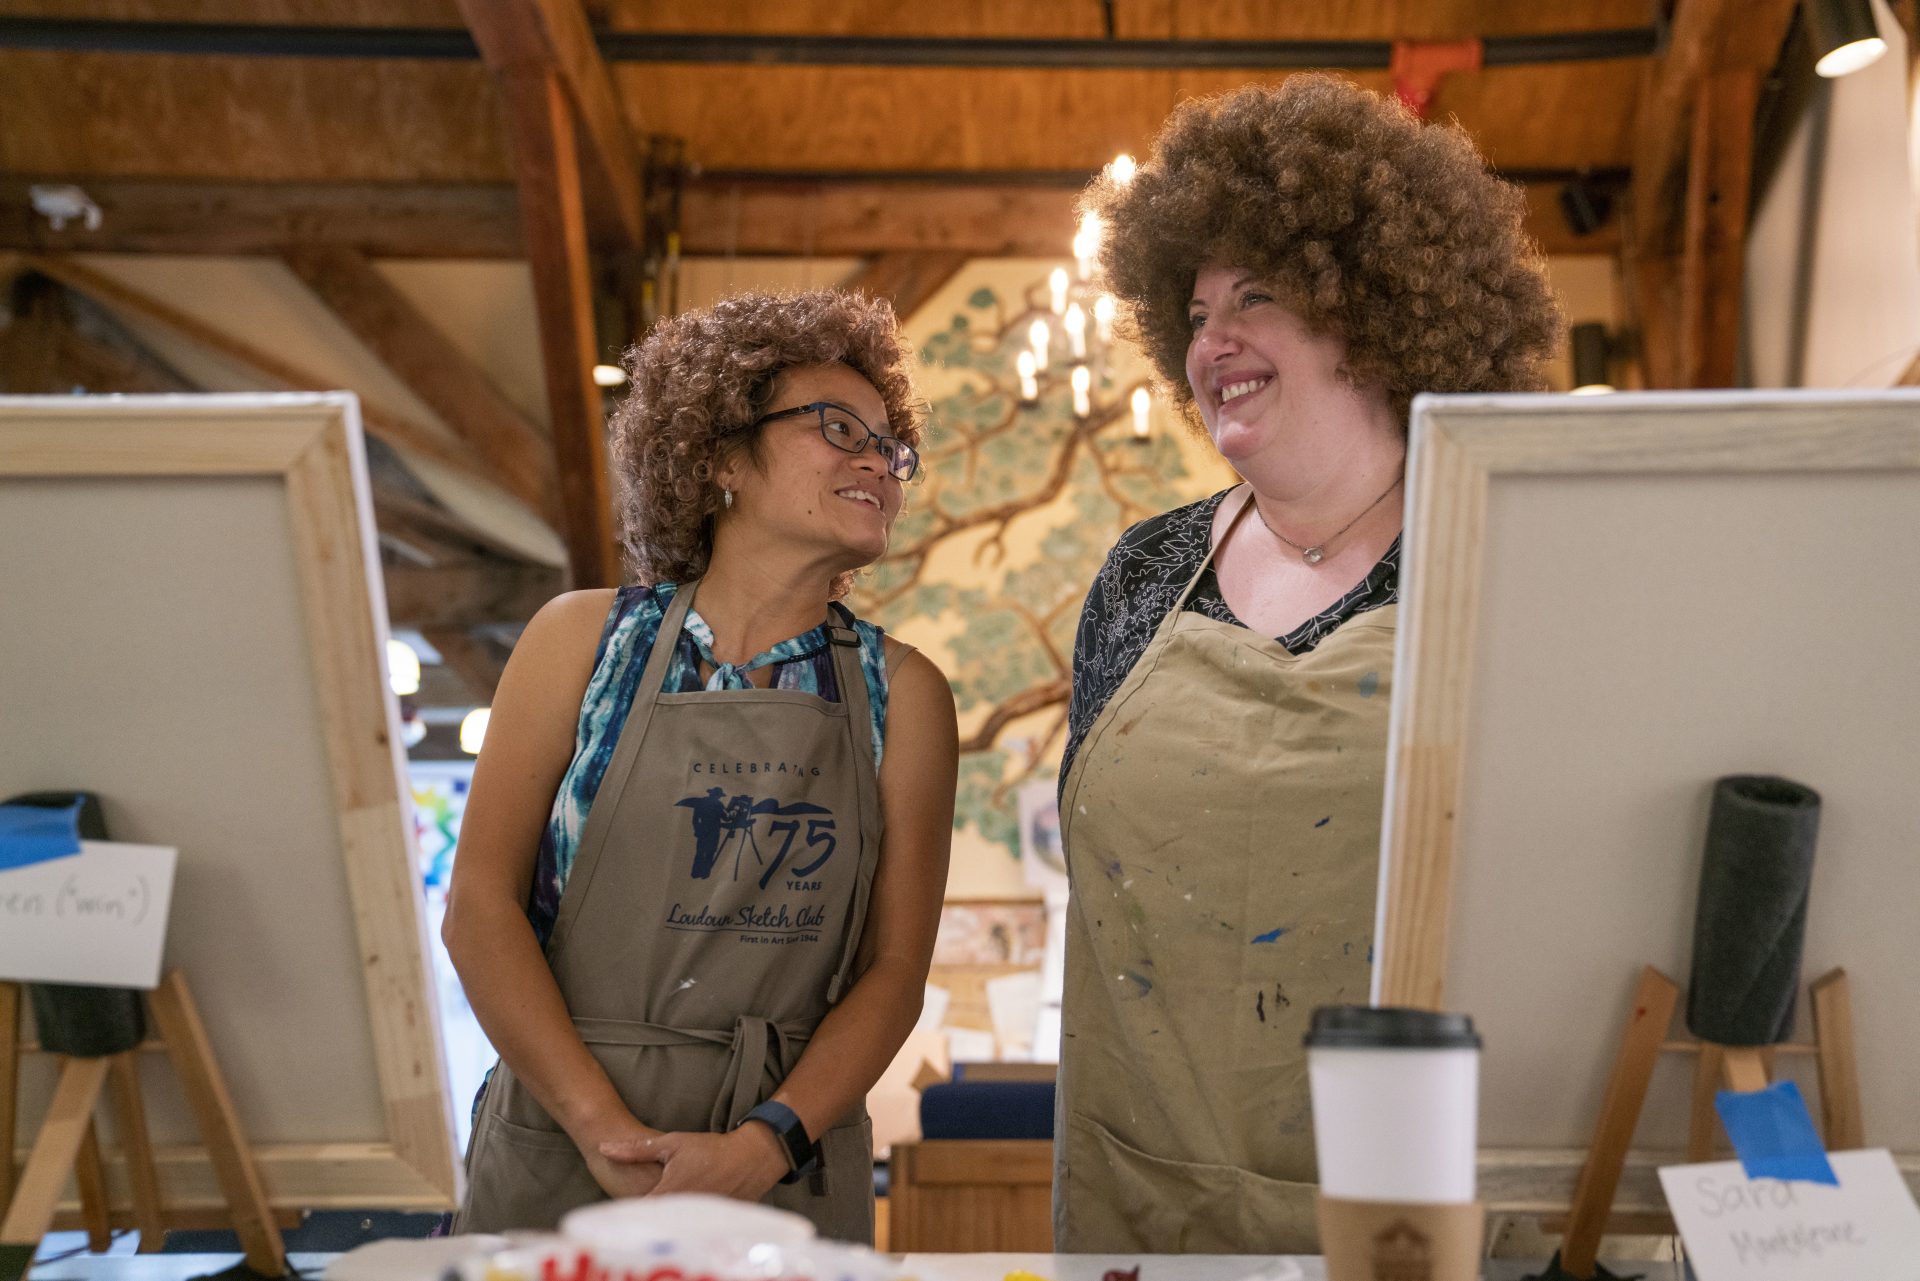 From left, Huyen MacMichael and Sara Monteleone exchange laughs during the  Bob Ross painting class at the Franklin Park Arts Center. MacMichael and Monteleone wore the iconic Bob Ross wig during the entire class.